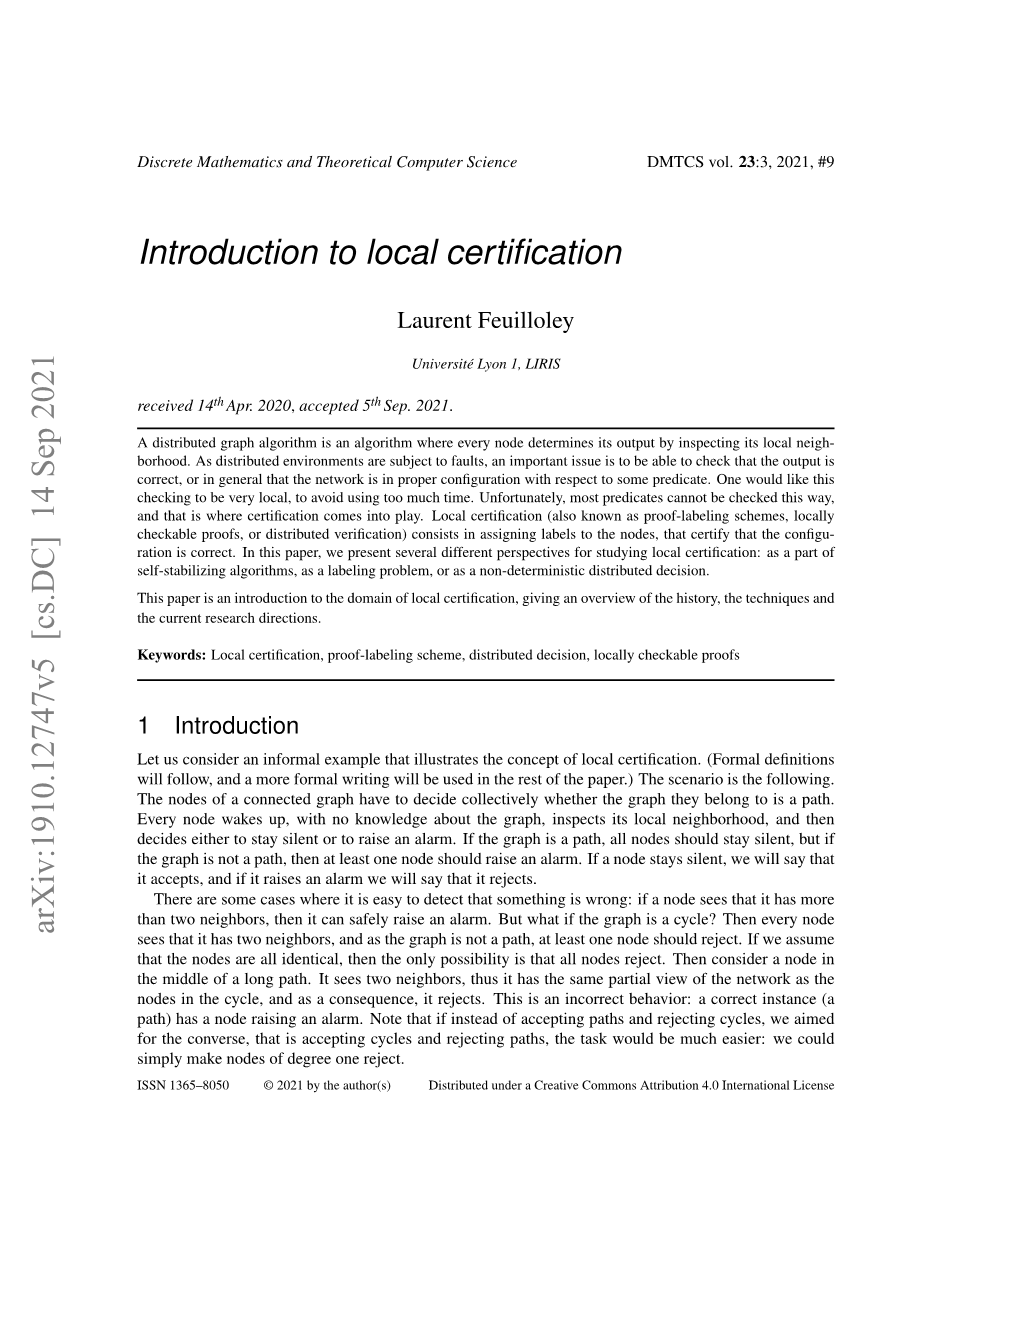 Introduction to Local Certification